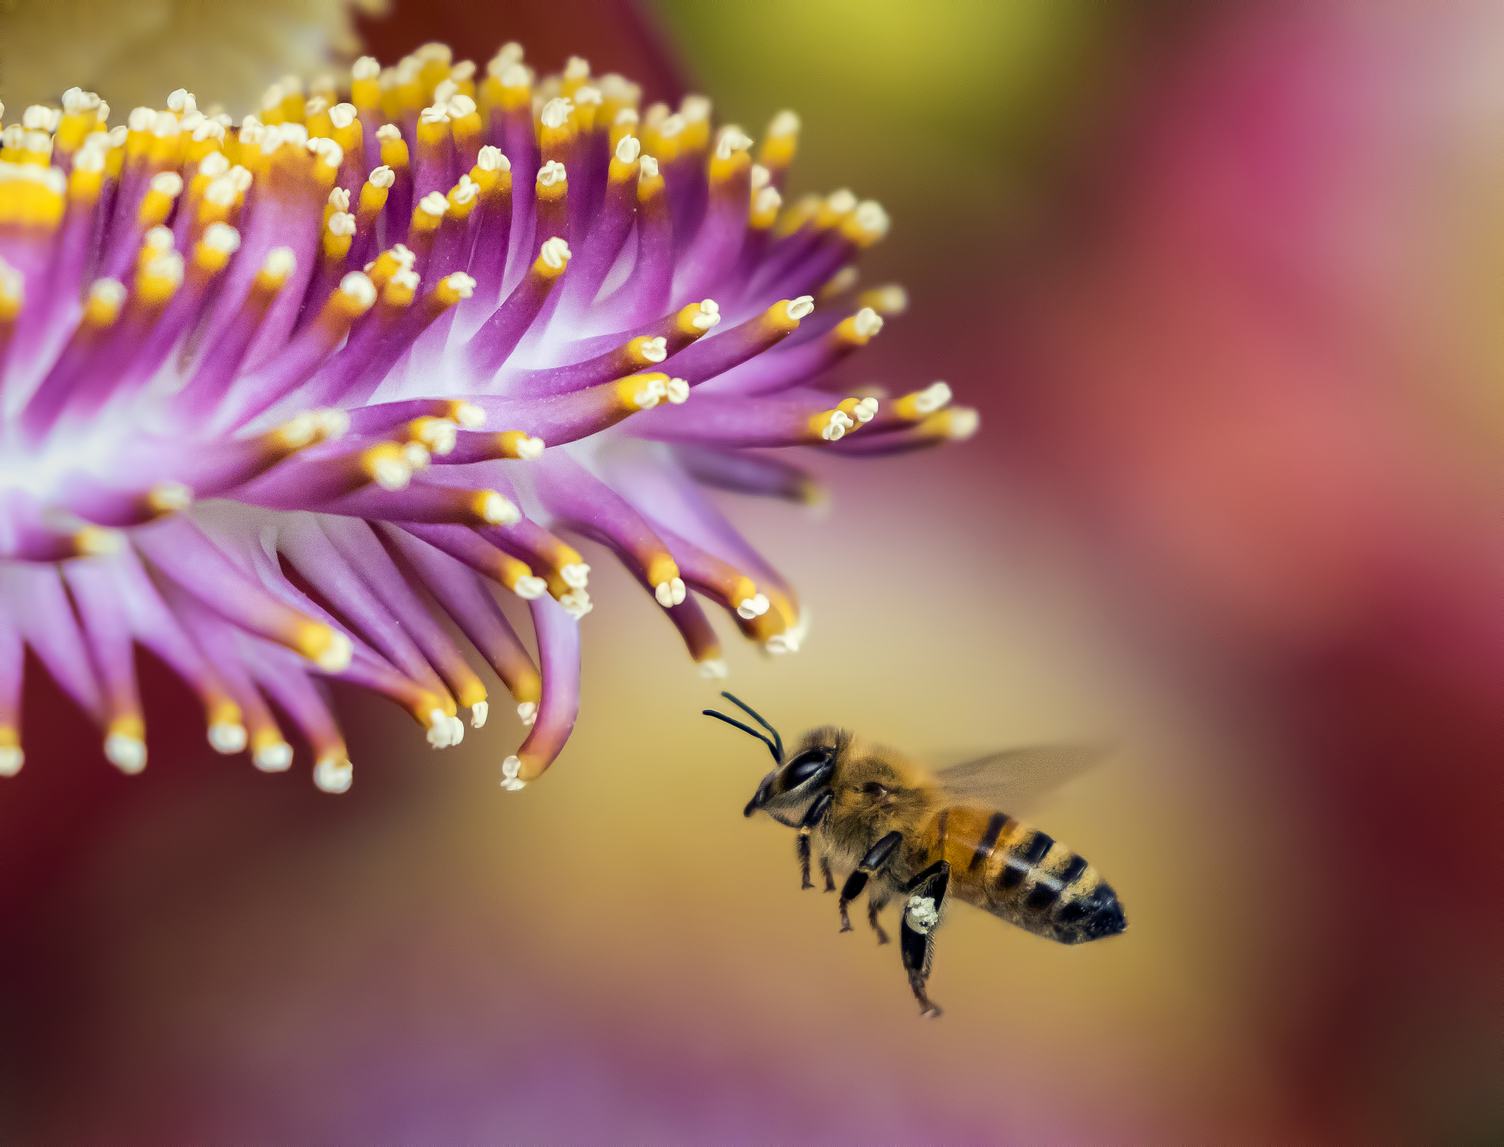 A Bee Collecting Pollen from a Flower on a Pink Blurred Background